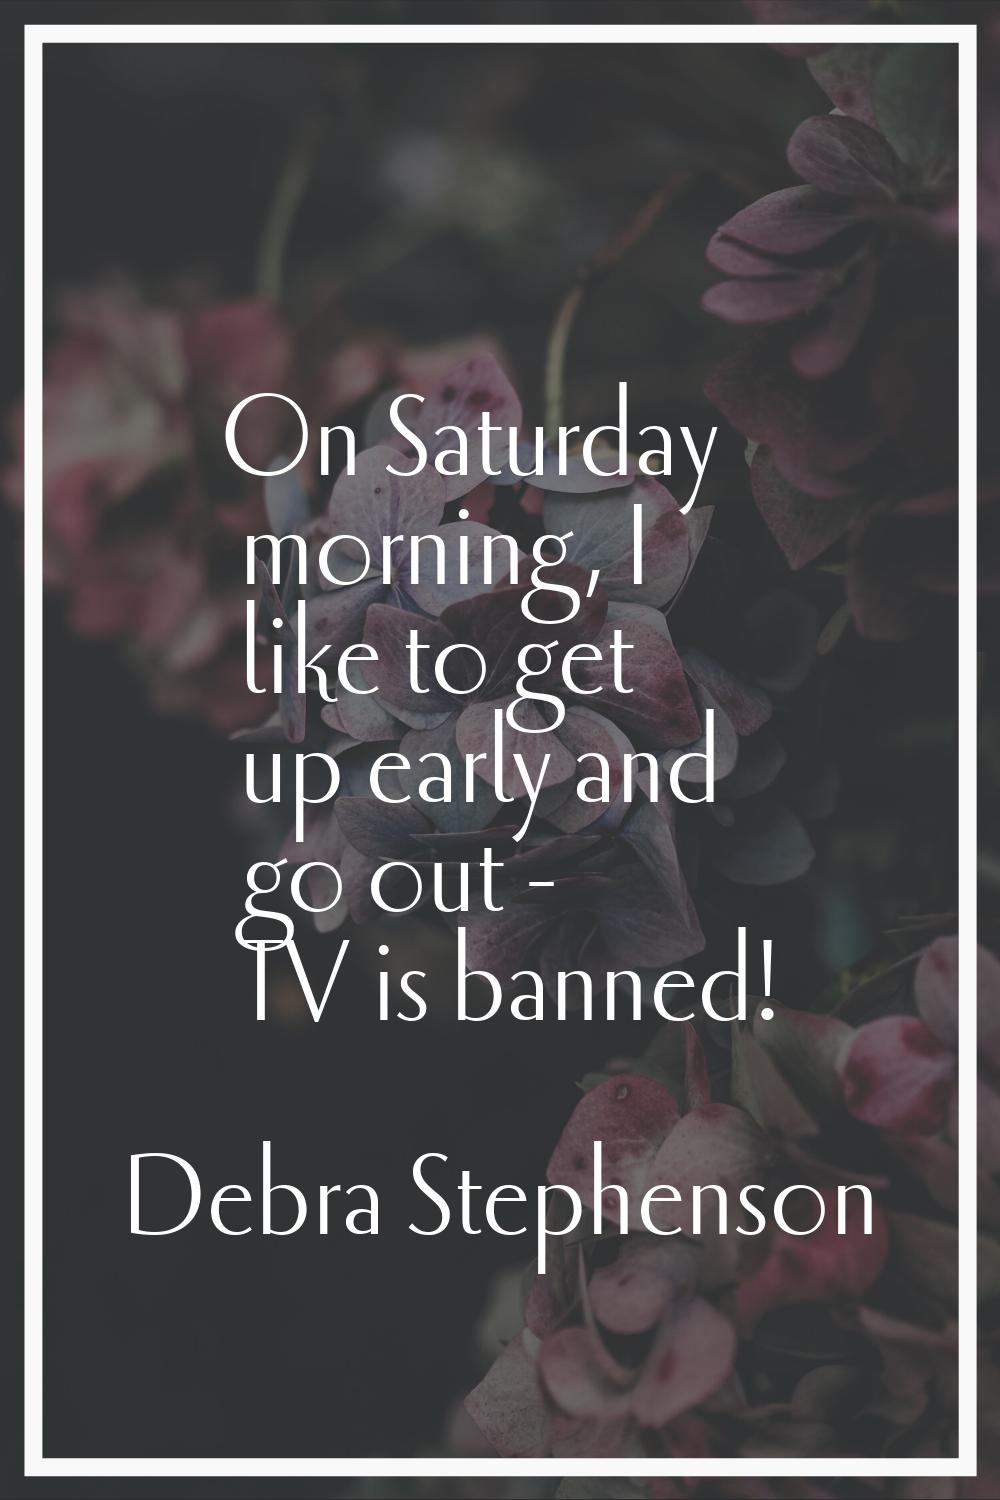 On Saturday morning, I like to get up early and go out - TV is banned!